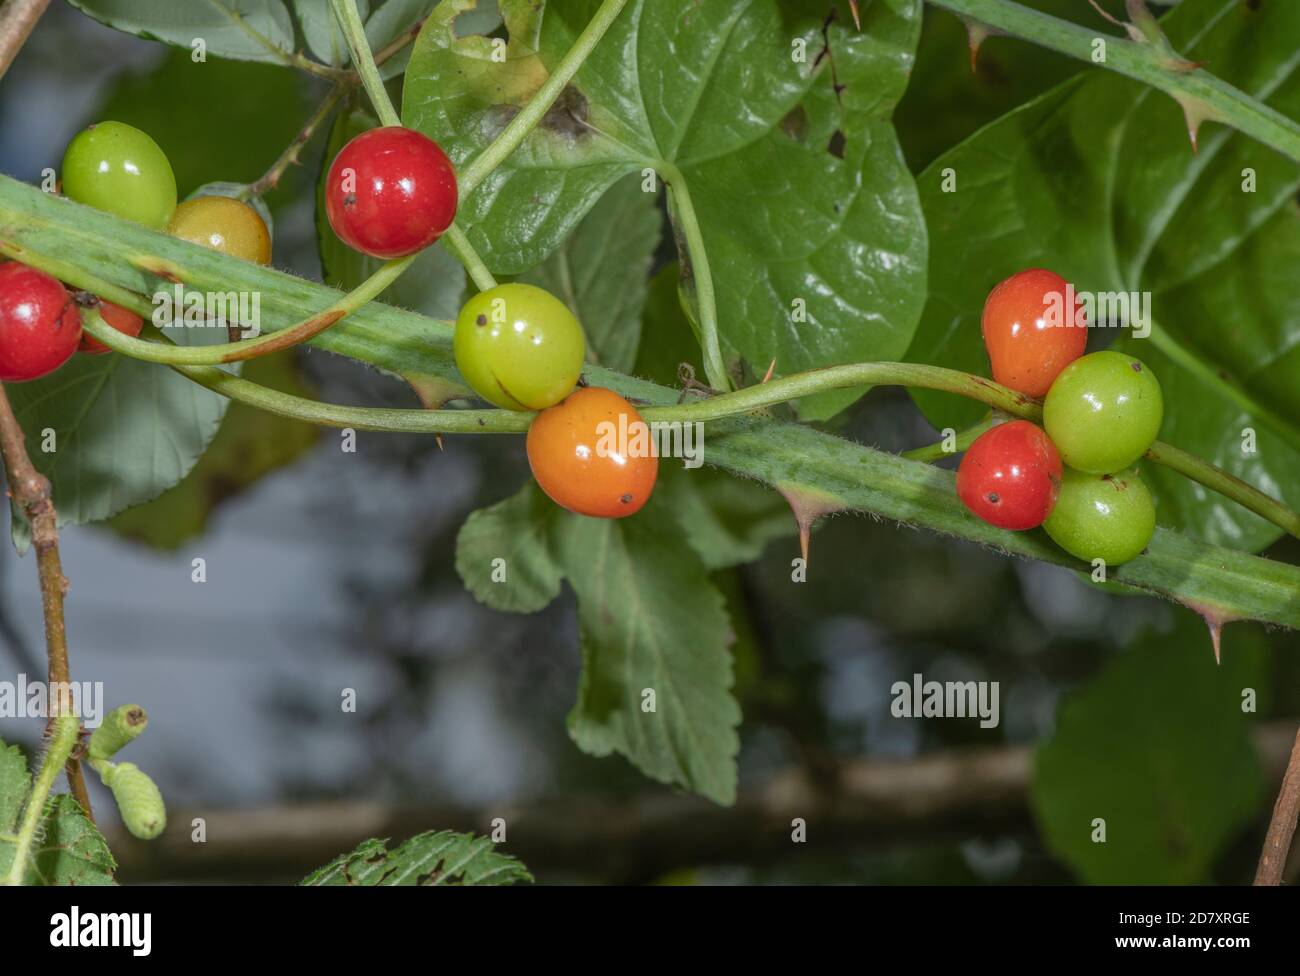 Ripe berries of Black bryony, Dioscorea communis, in late summer hedgerow. Stock Photo